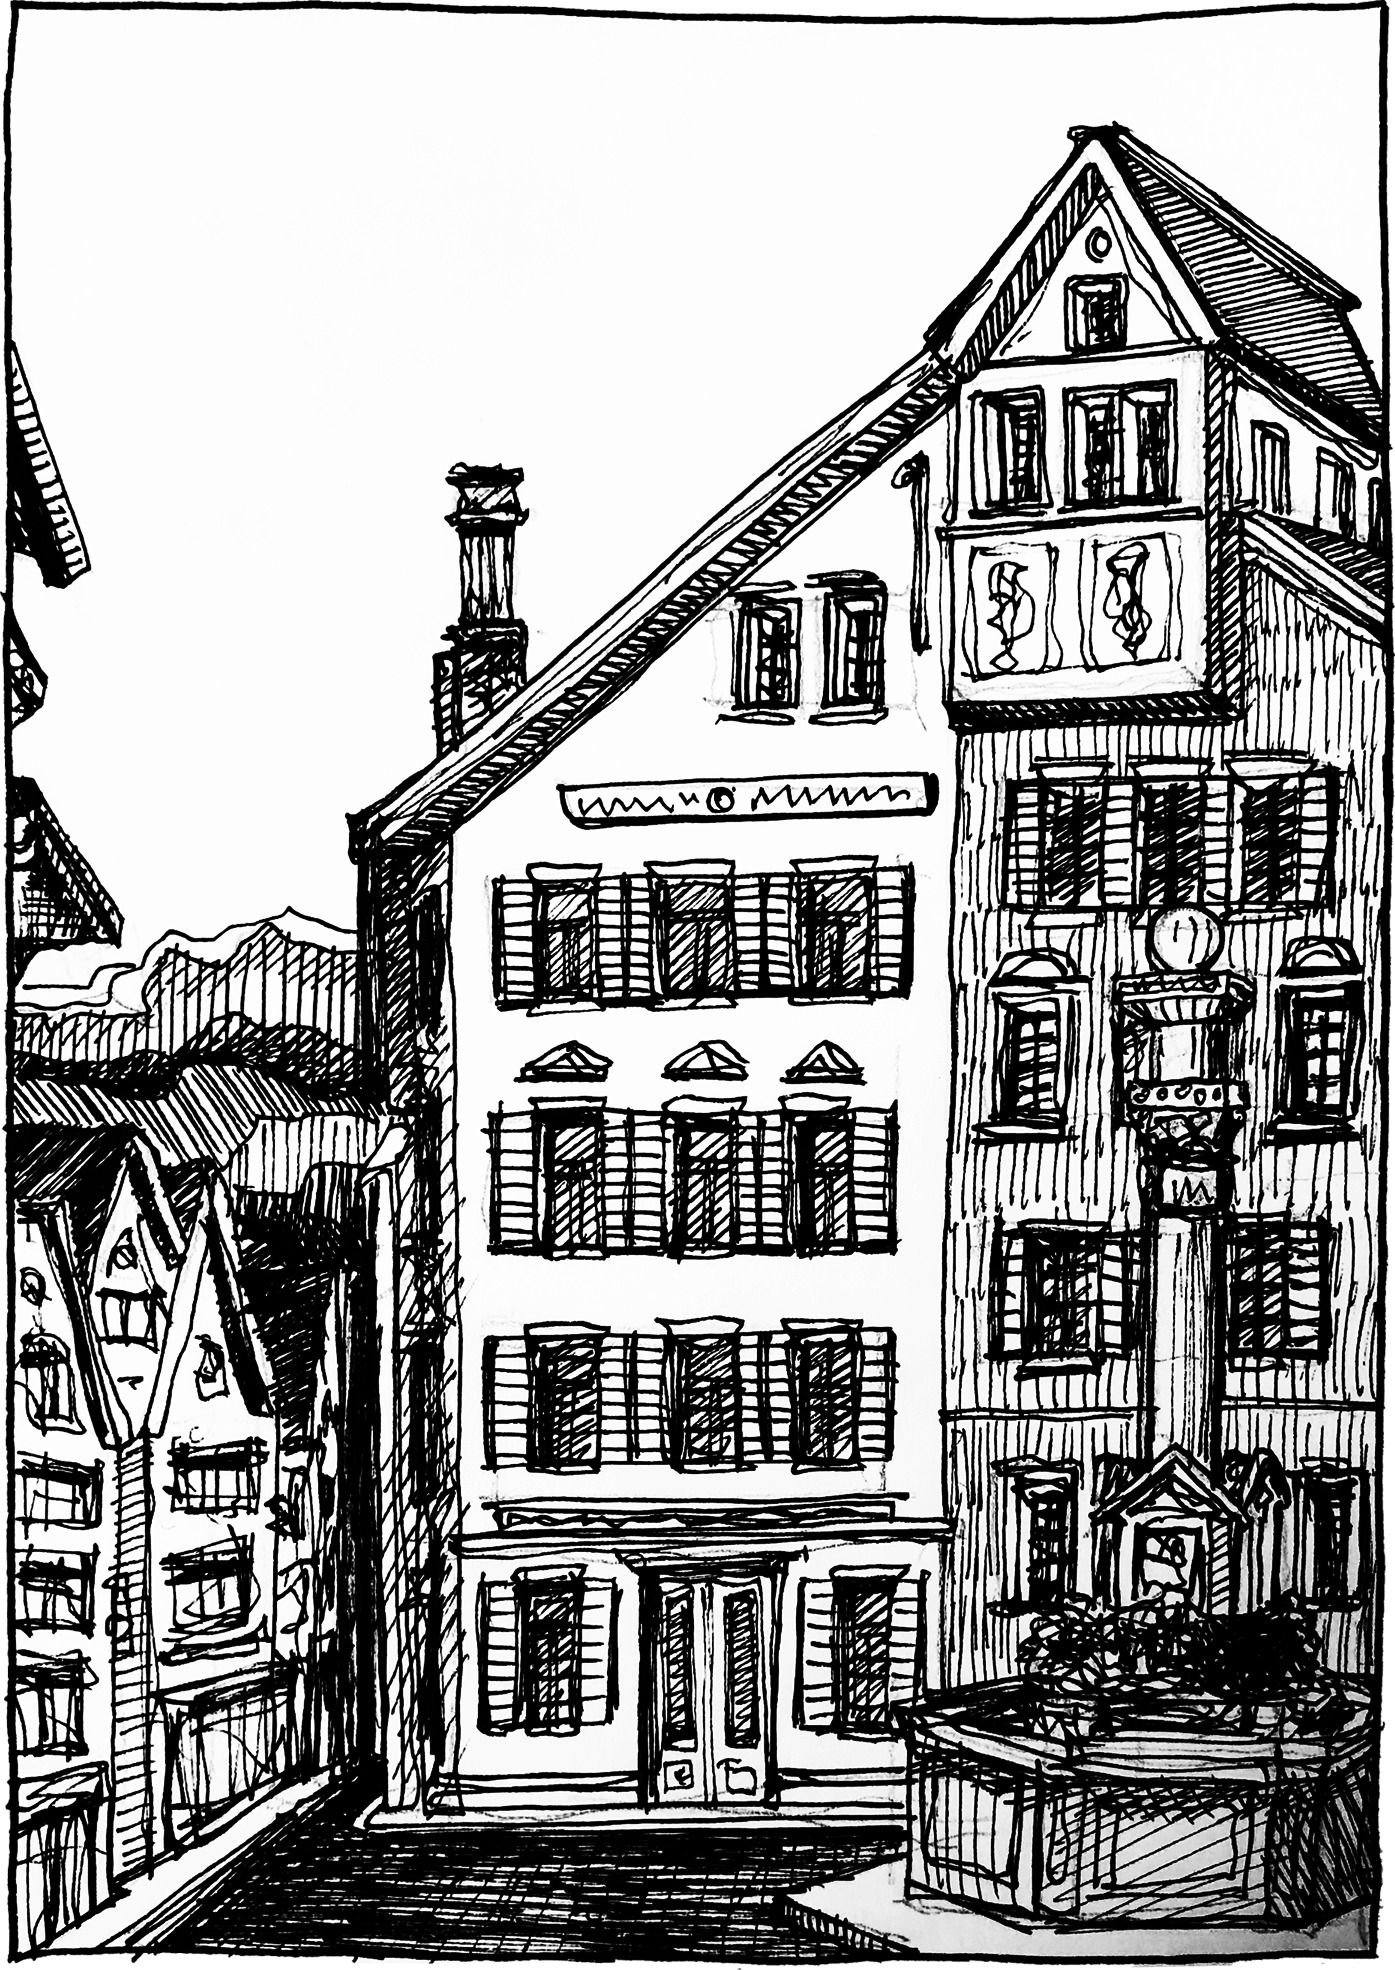 Webergasse 23 - Drawing by Camillo Visini